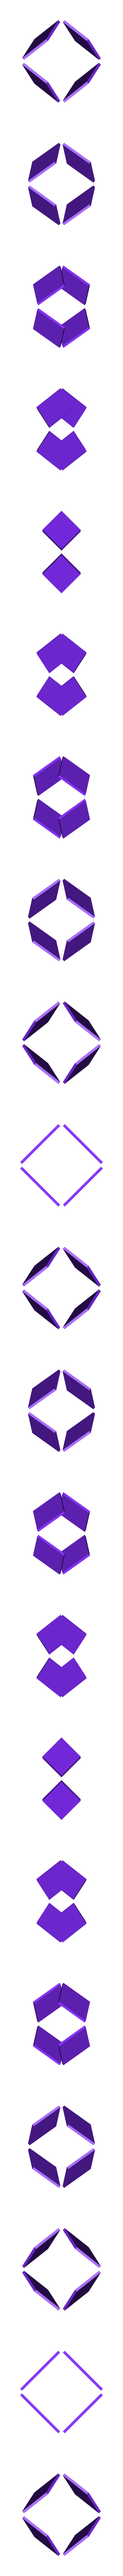 rhombic_dohecahedron_color_2.stl Download free STL file Cube Illusion (Rhombic Dodecahedron) • 3D printer model, MosaicManufacturing